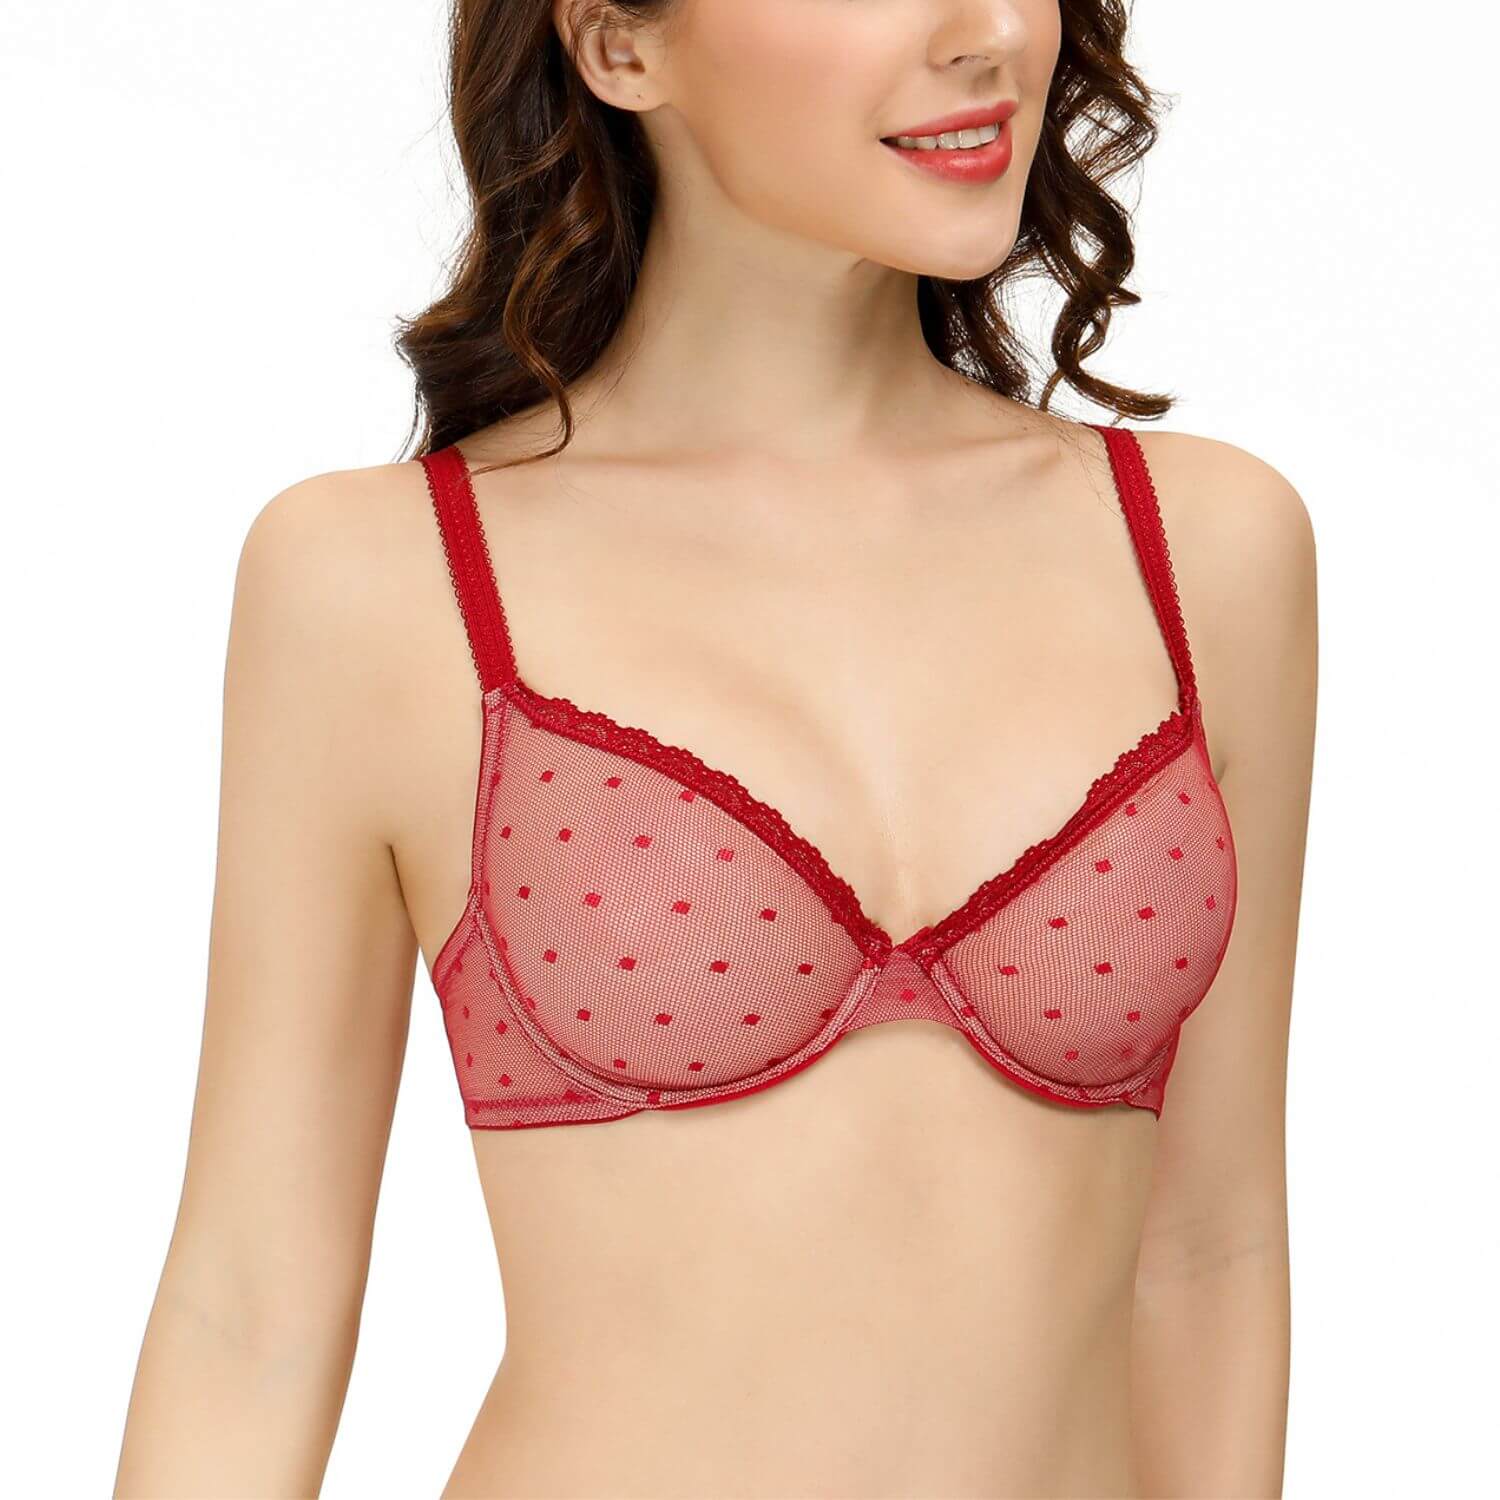 Red Mesh Unlined Underwire Lace bralette